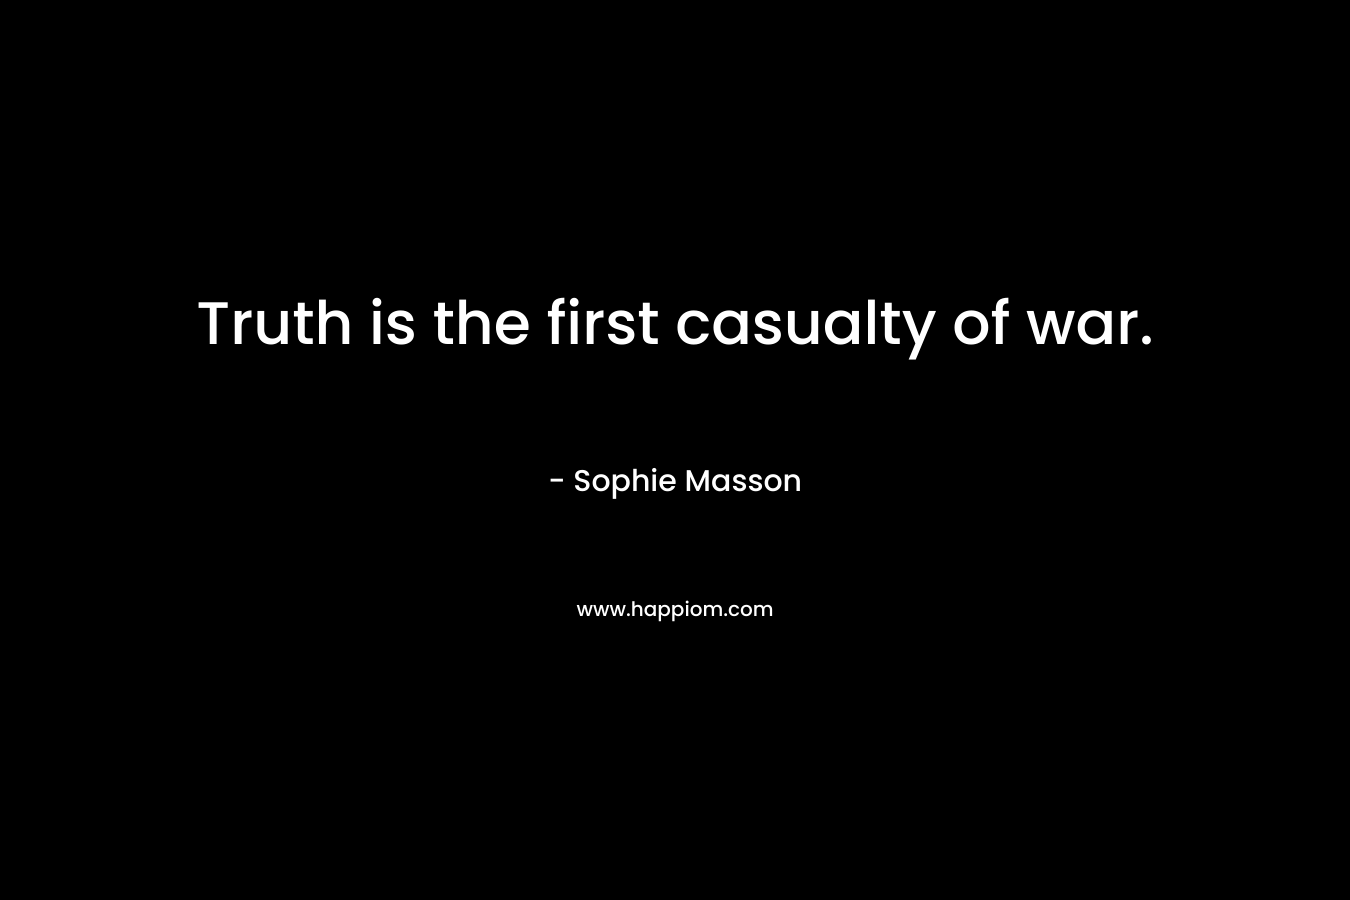 Truth is the first casualty of war.